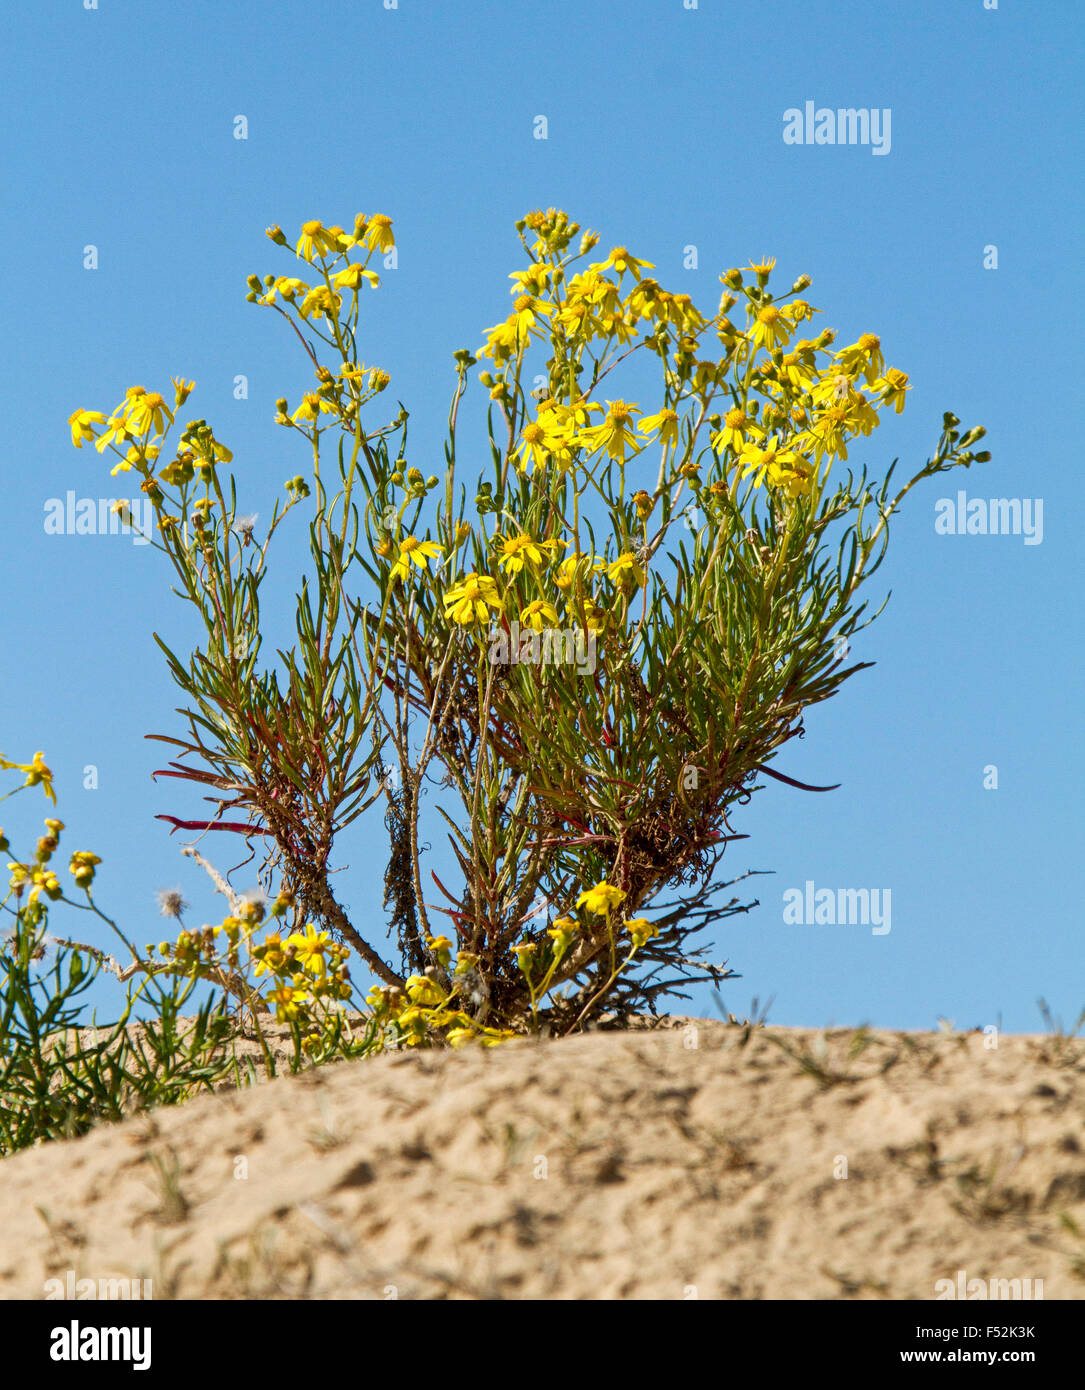 Clump of yellow wildflowers, Senecio magnificus growing in sandy soil against blue sky in Mungo National Park, outback Australia Stock Photo